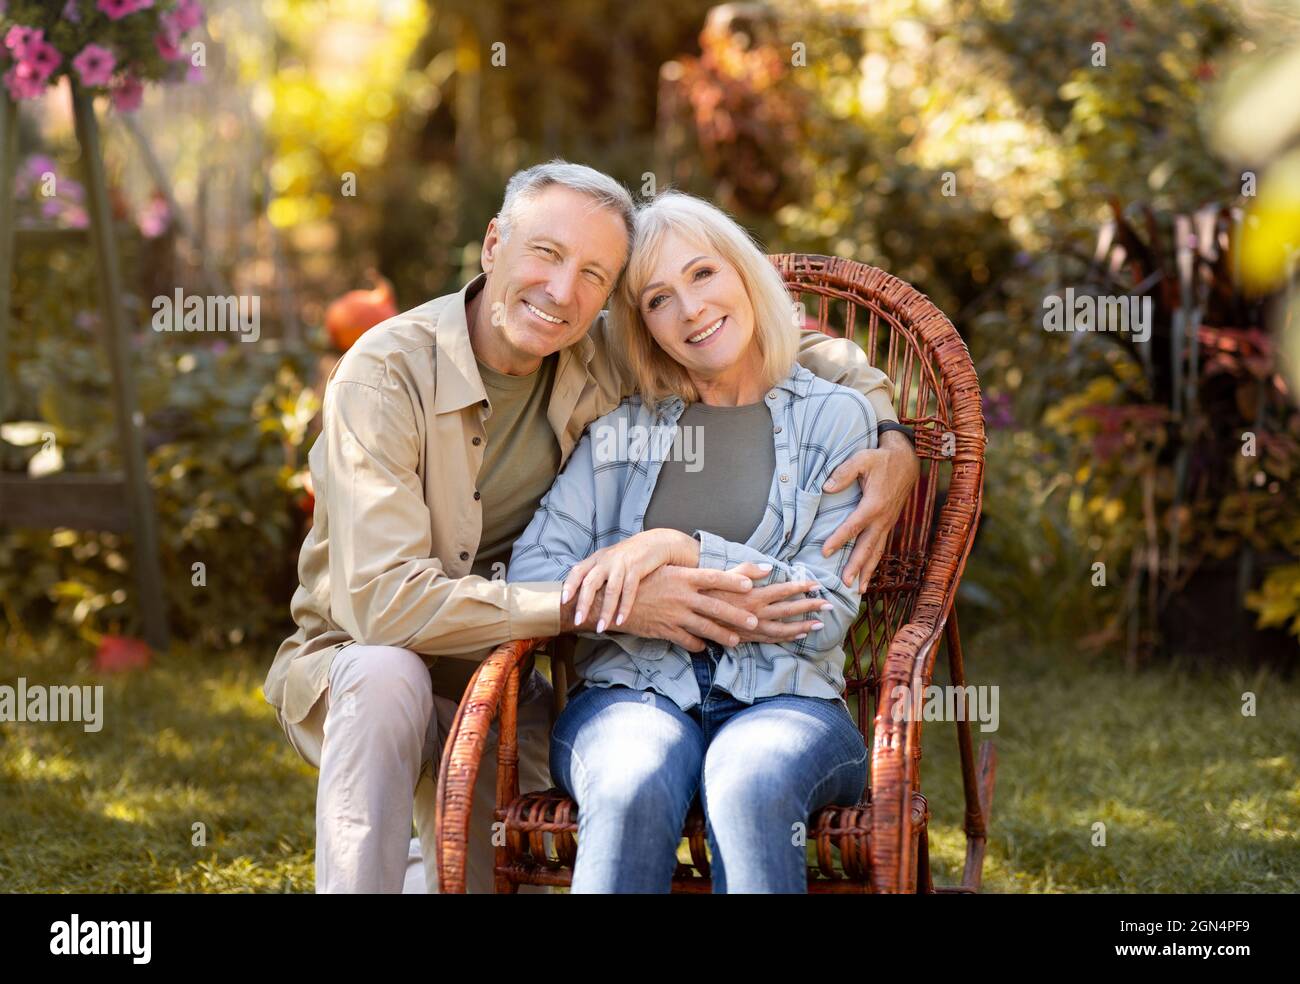 Loving elderly spouses resting in countryside, woman sitting in wicker chair, man embracing wife, copy space Stock Photo